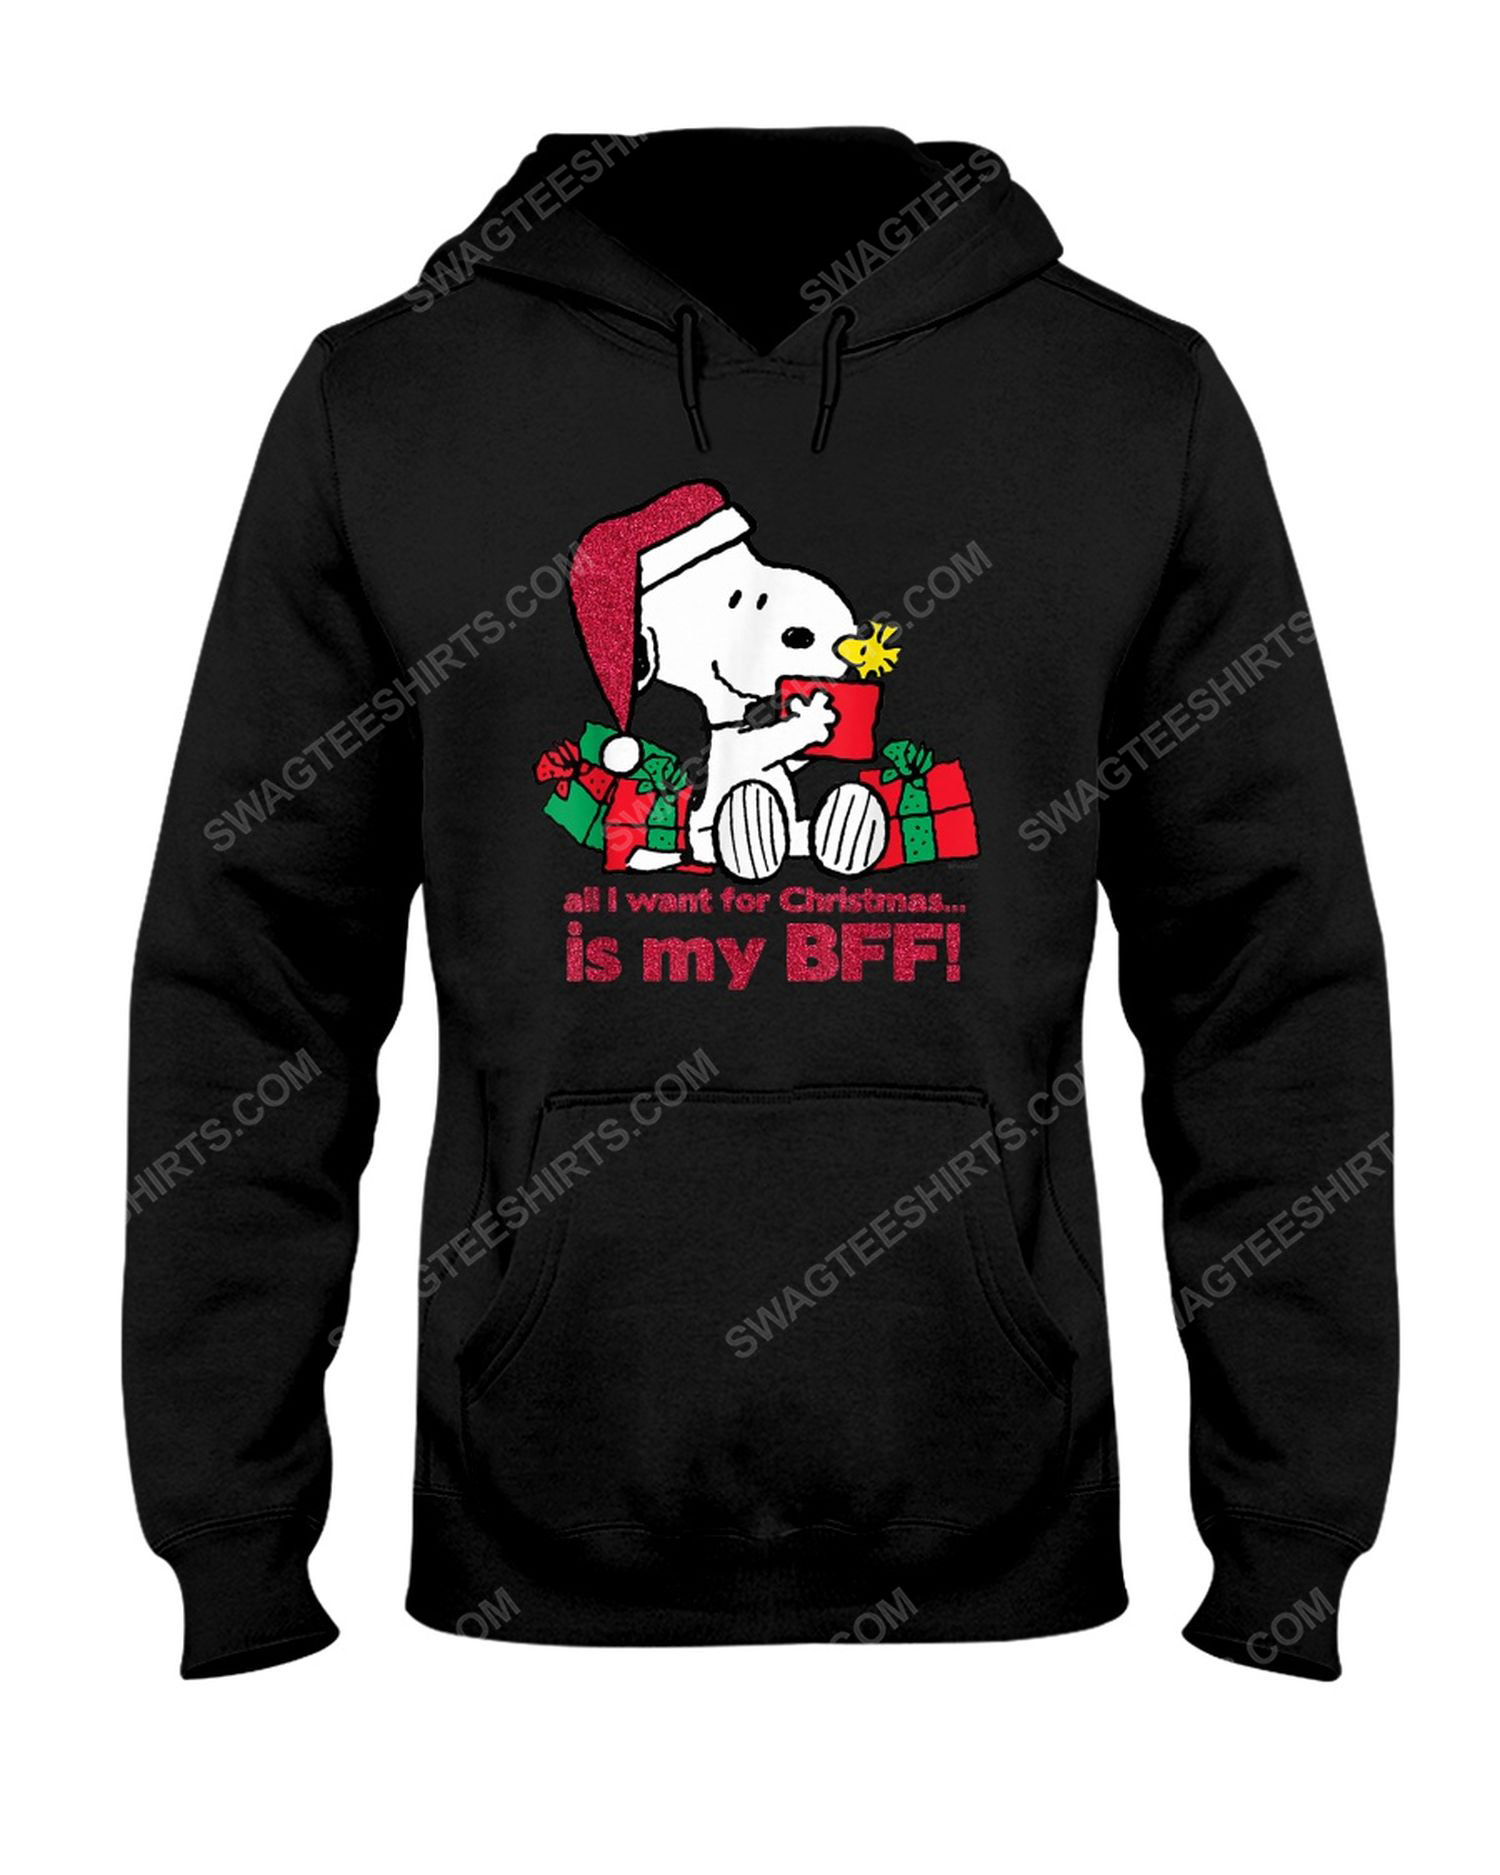 Snoopy all i want for christmas is my bff hoodie